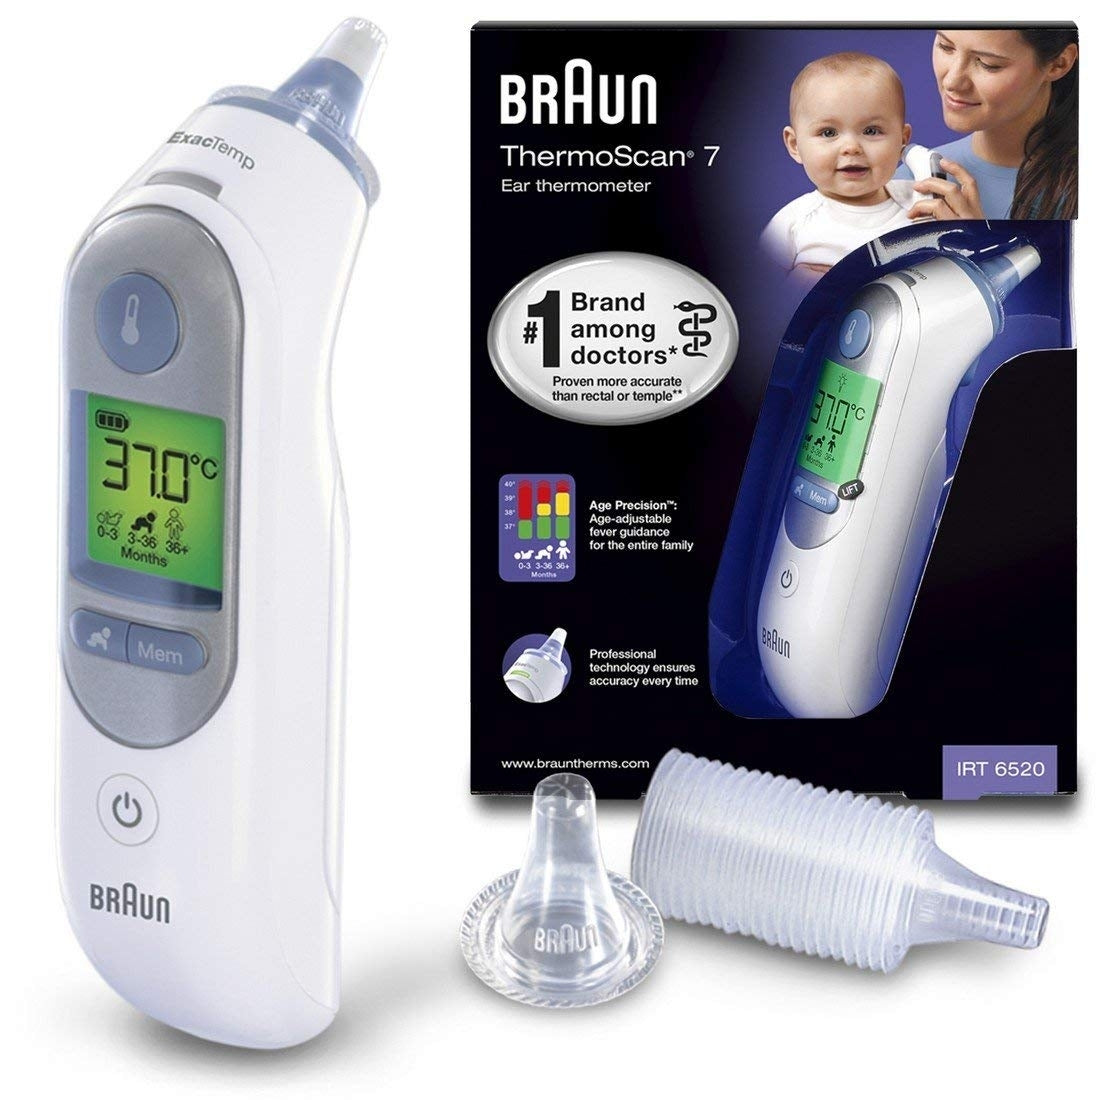 Braun ThermoScan IRT6520 Digital LCD Ear Thermometer